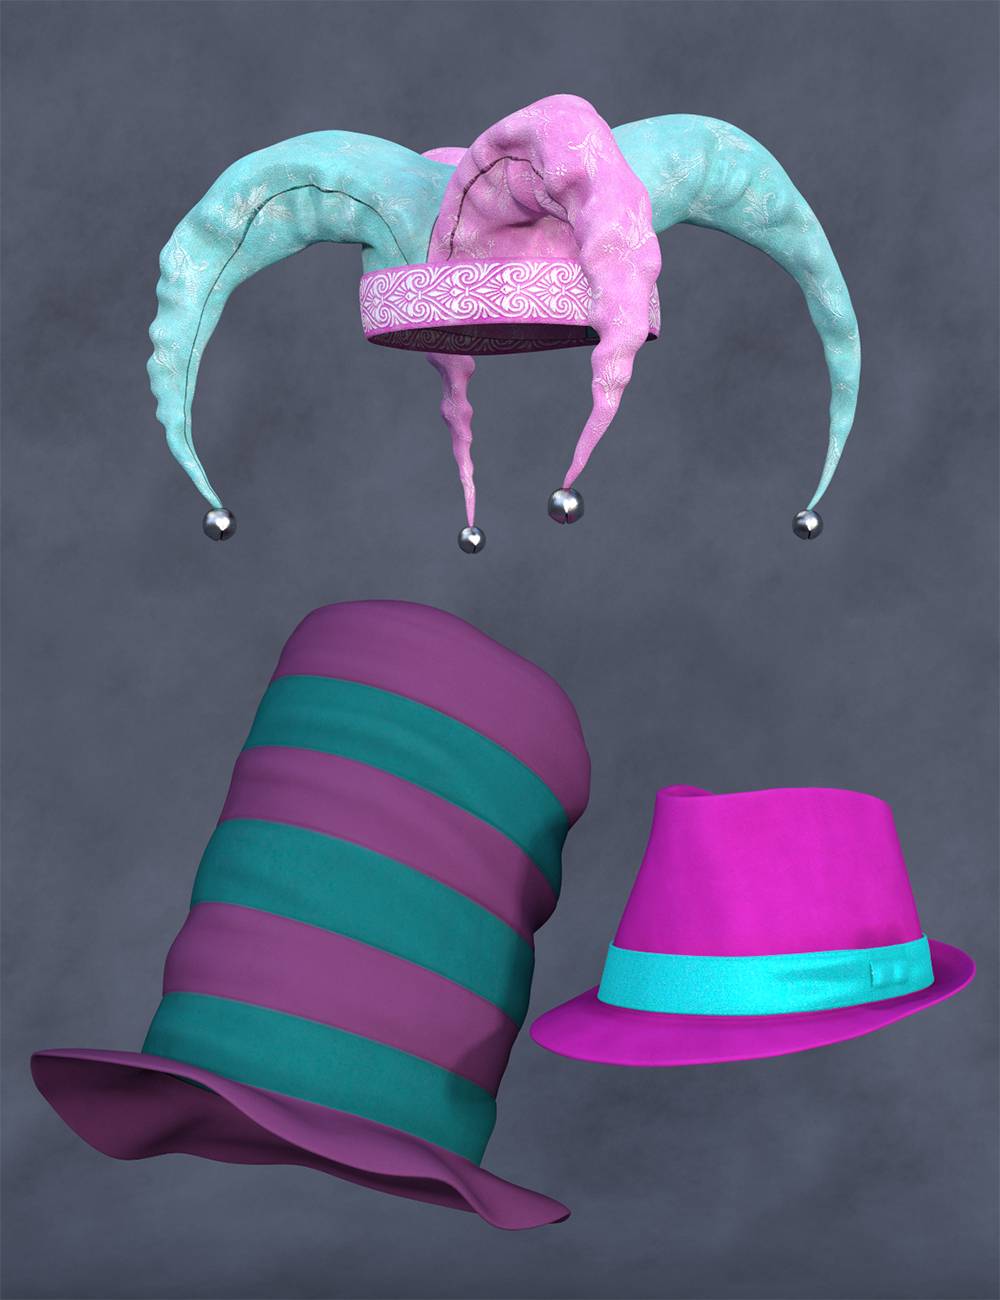 Fun Mardi Gras Mix and Match Hats for Genesis 8 and 8.1